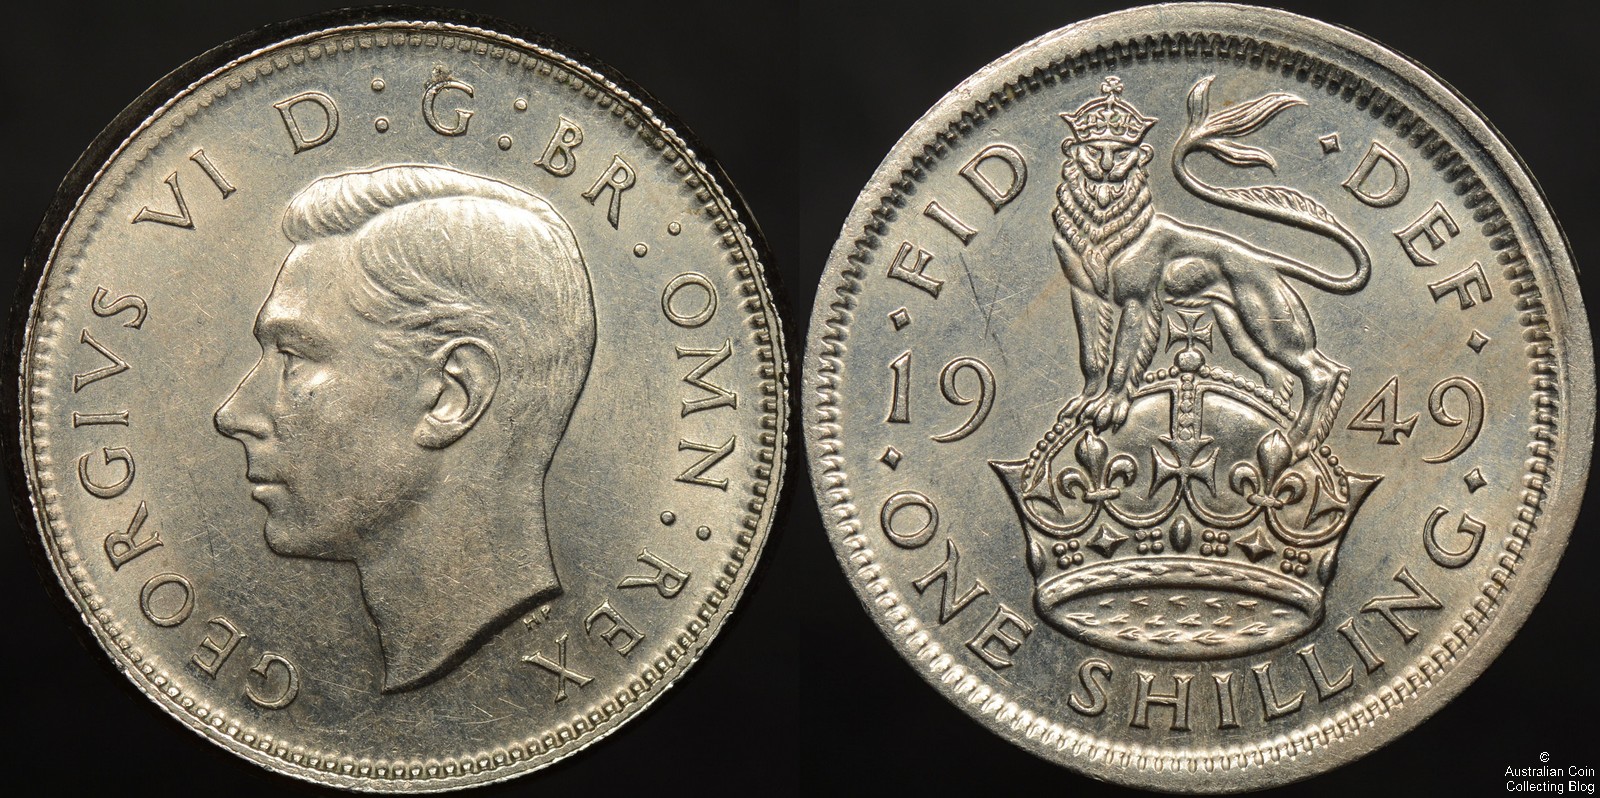 Great Britain 1949 Shilling Tilted Partial Collar Error